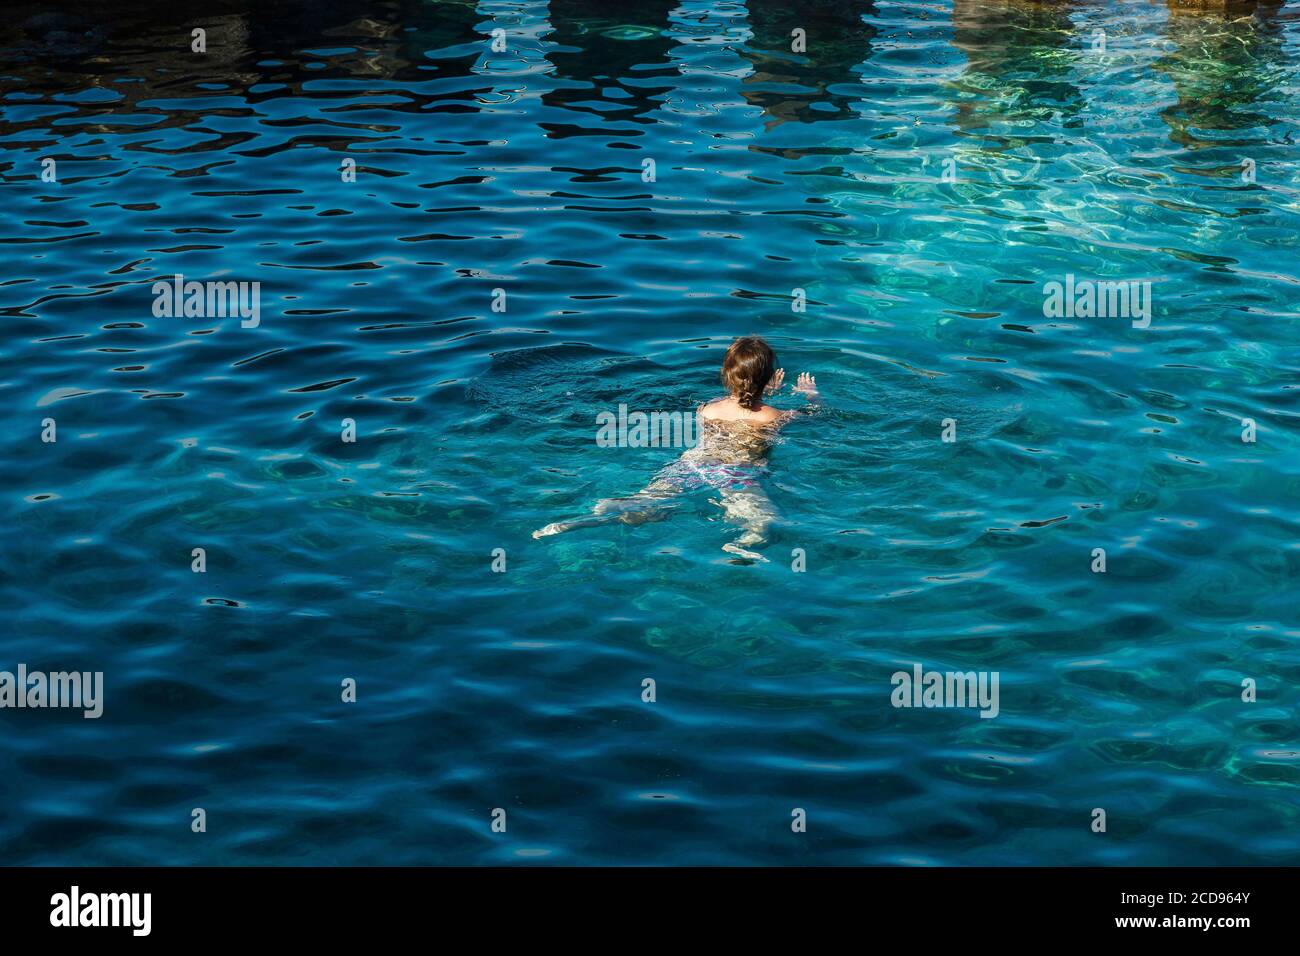 Spain, Canary Islands, La Palma, young woman swimming in a natural pool of sea water Stock Photo